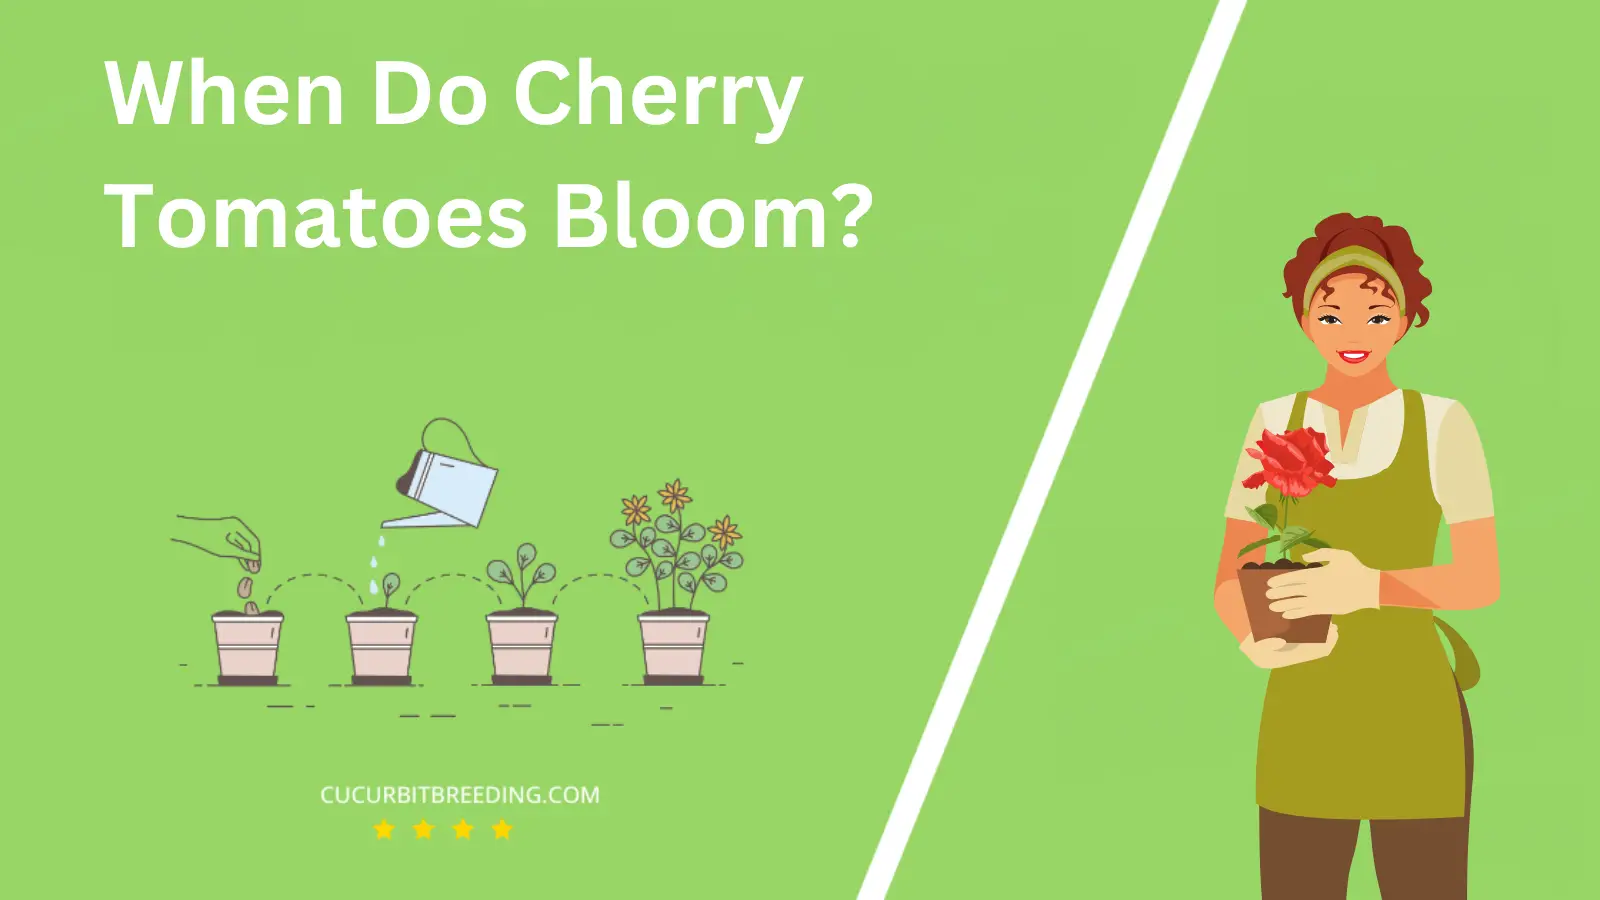 When Do Cherry Tomatoes Bloom?